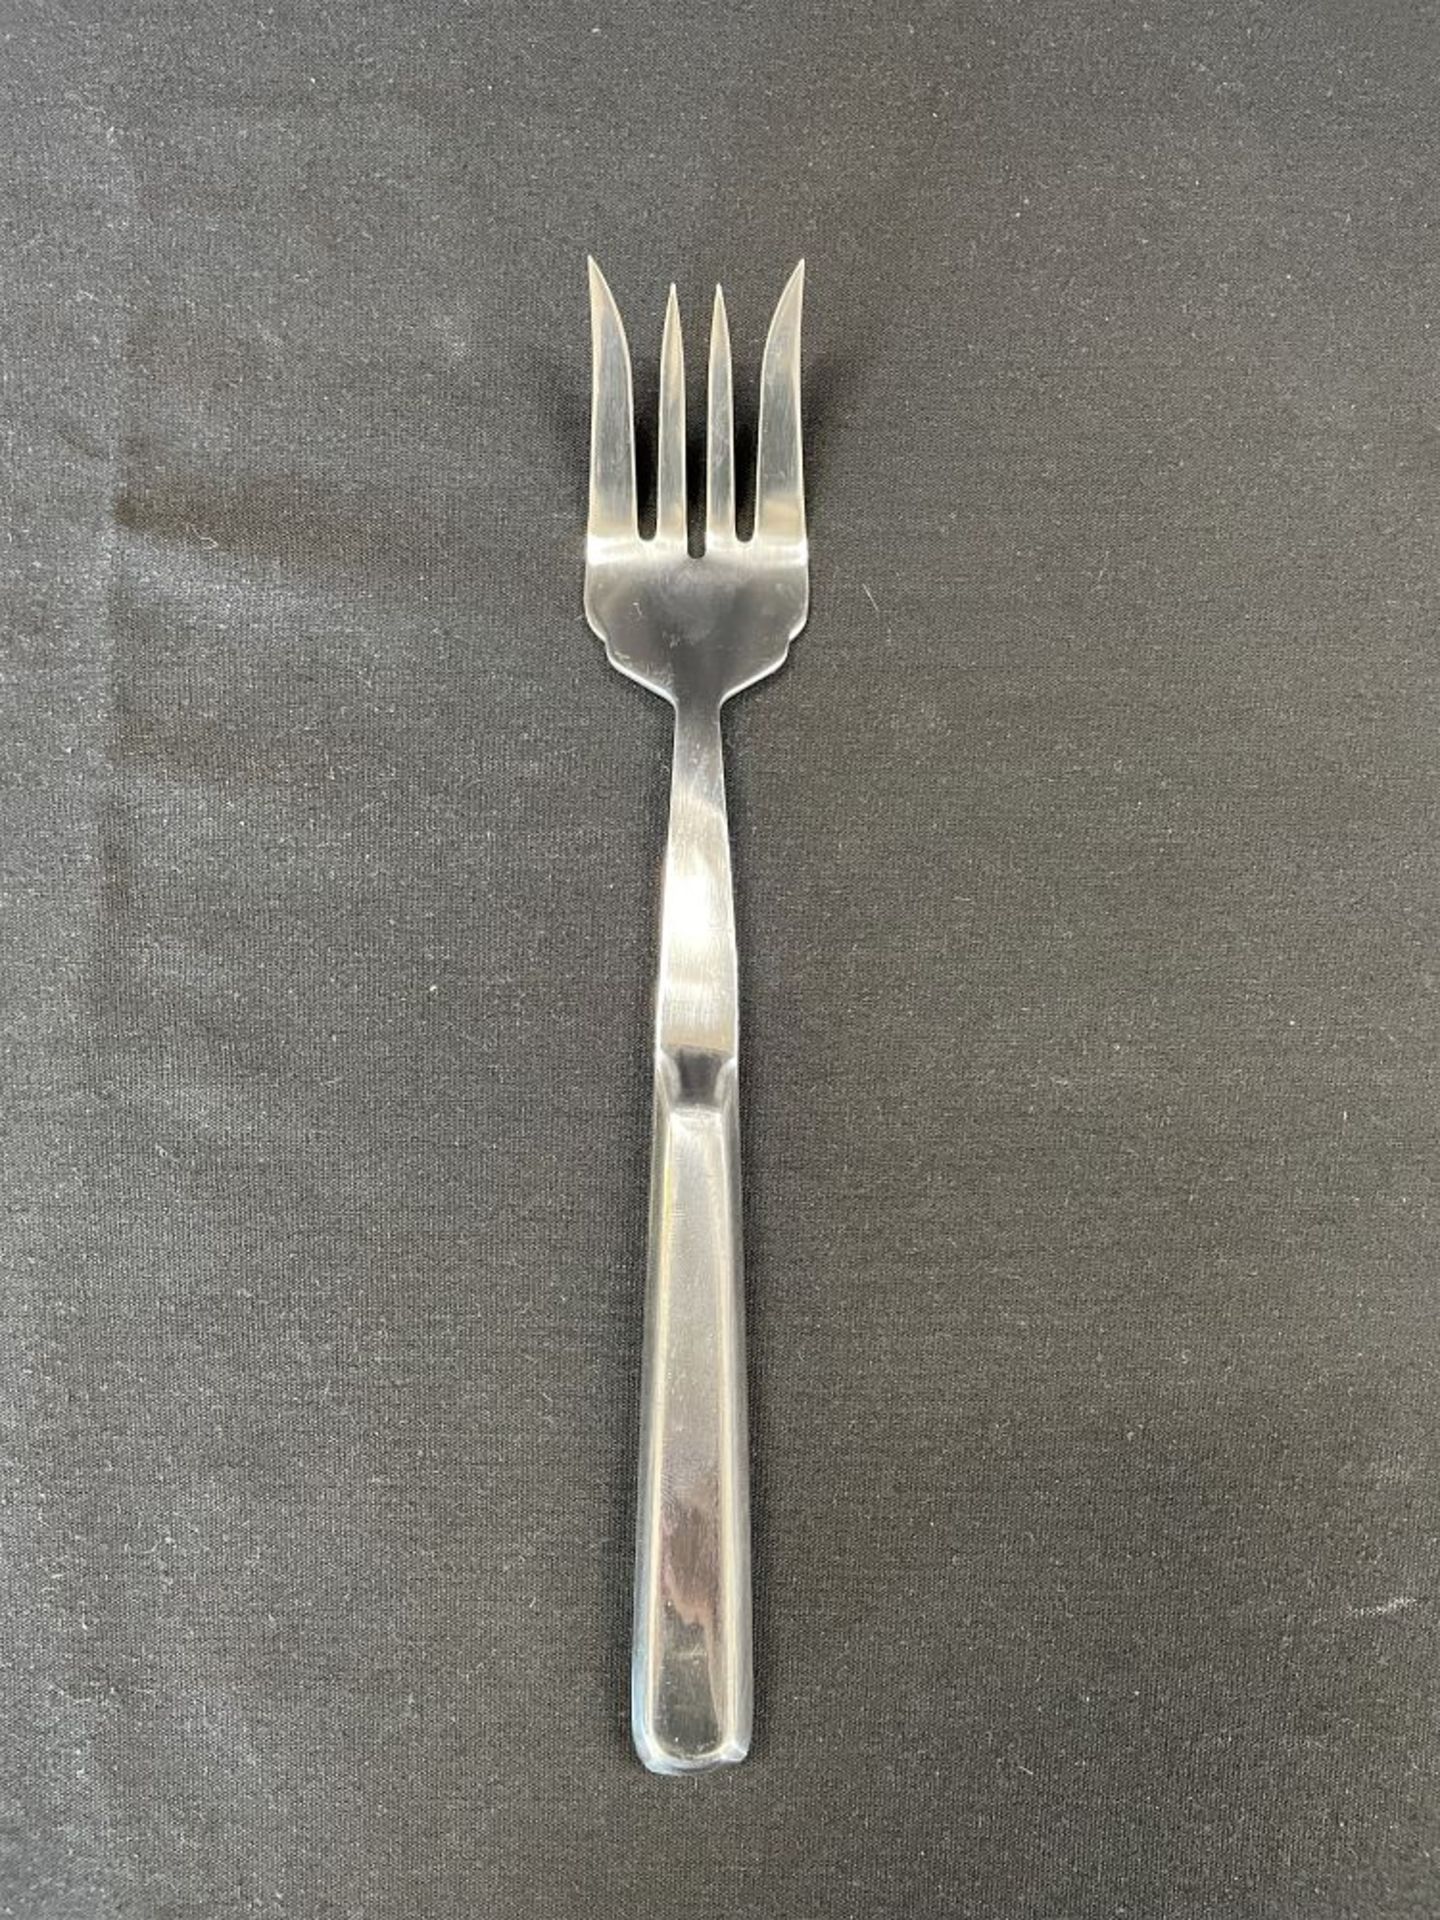 4-tine Meat Sering Fork